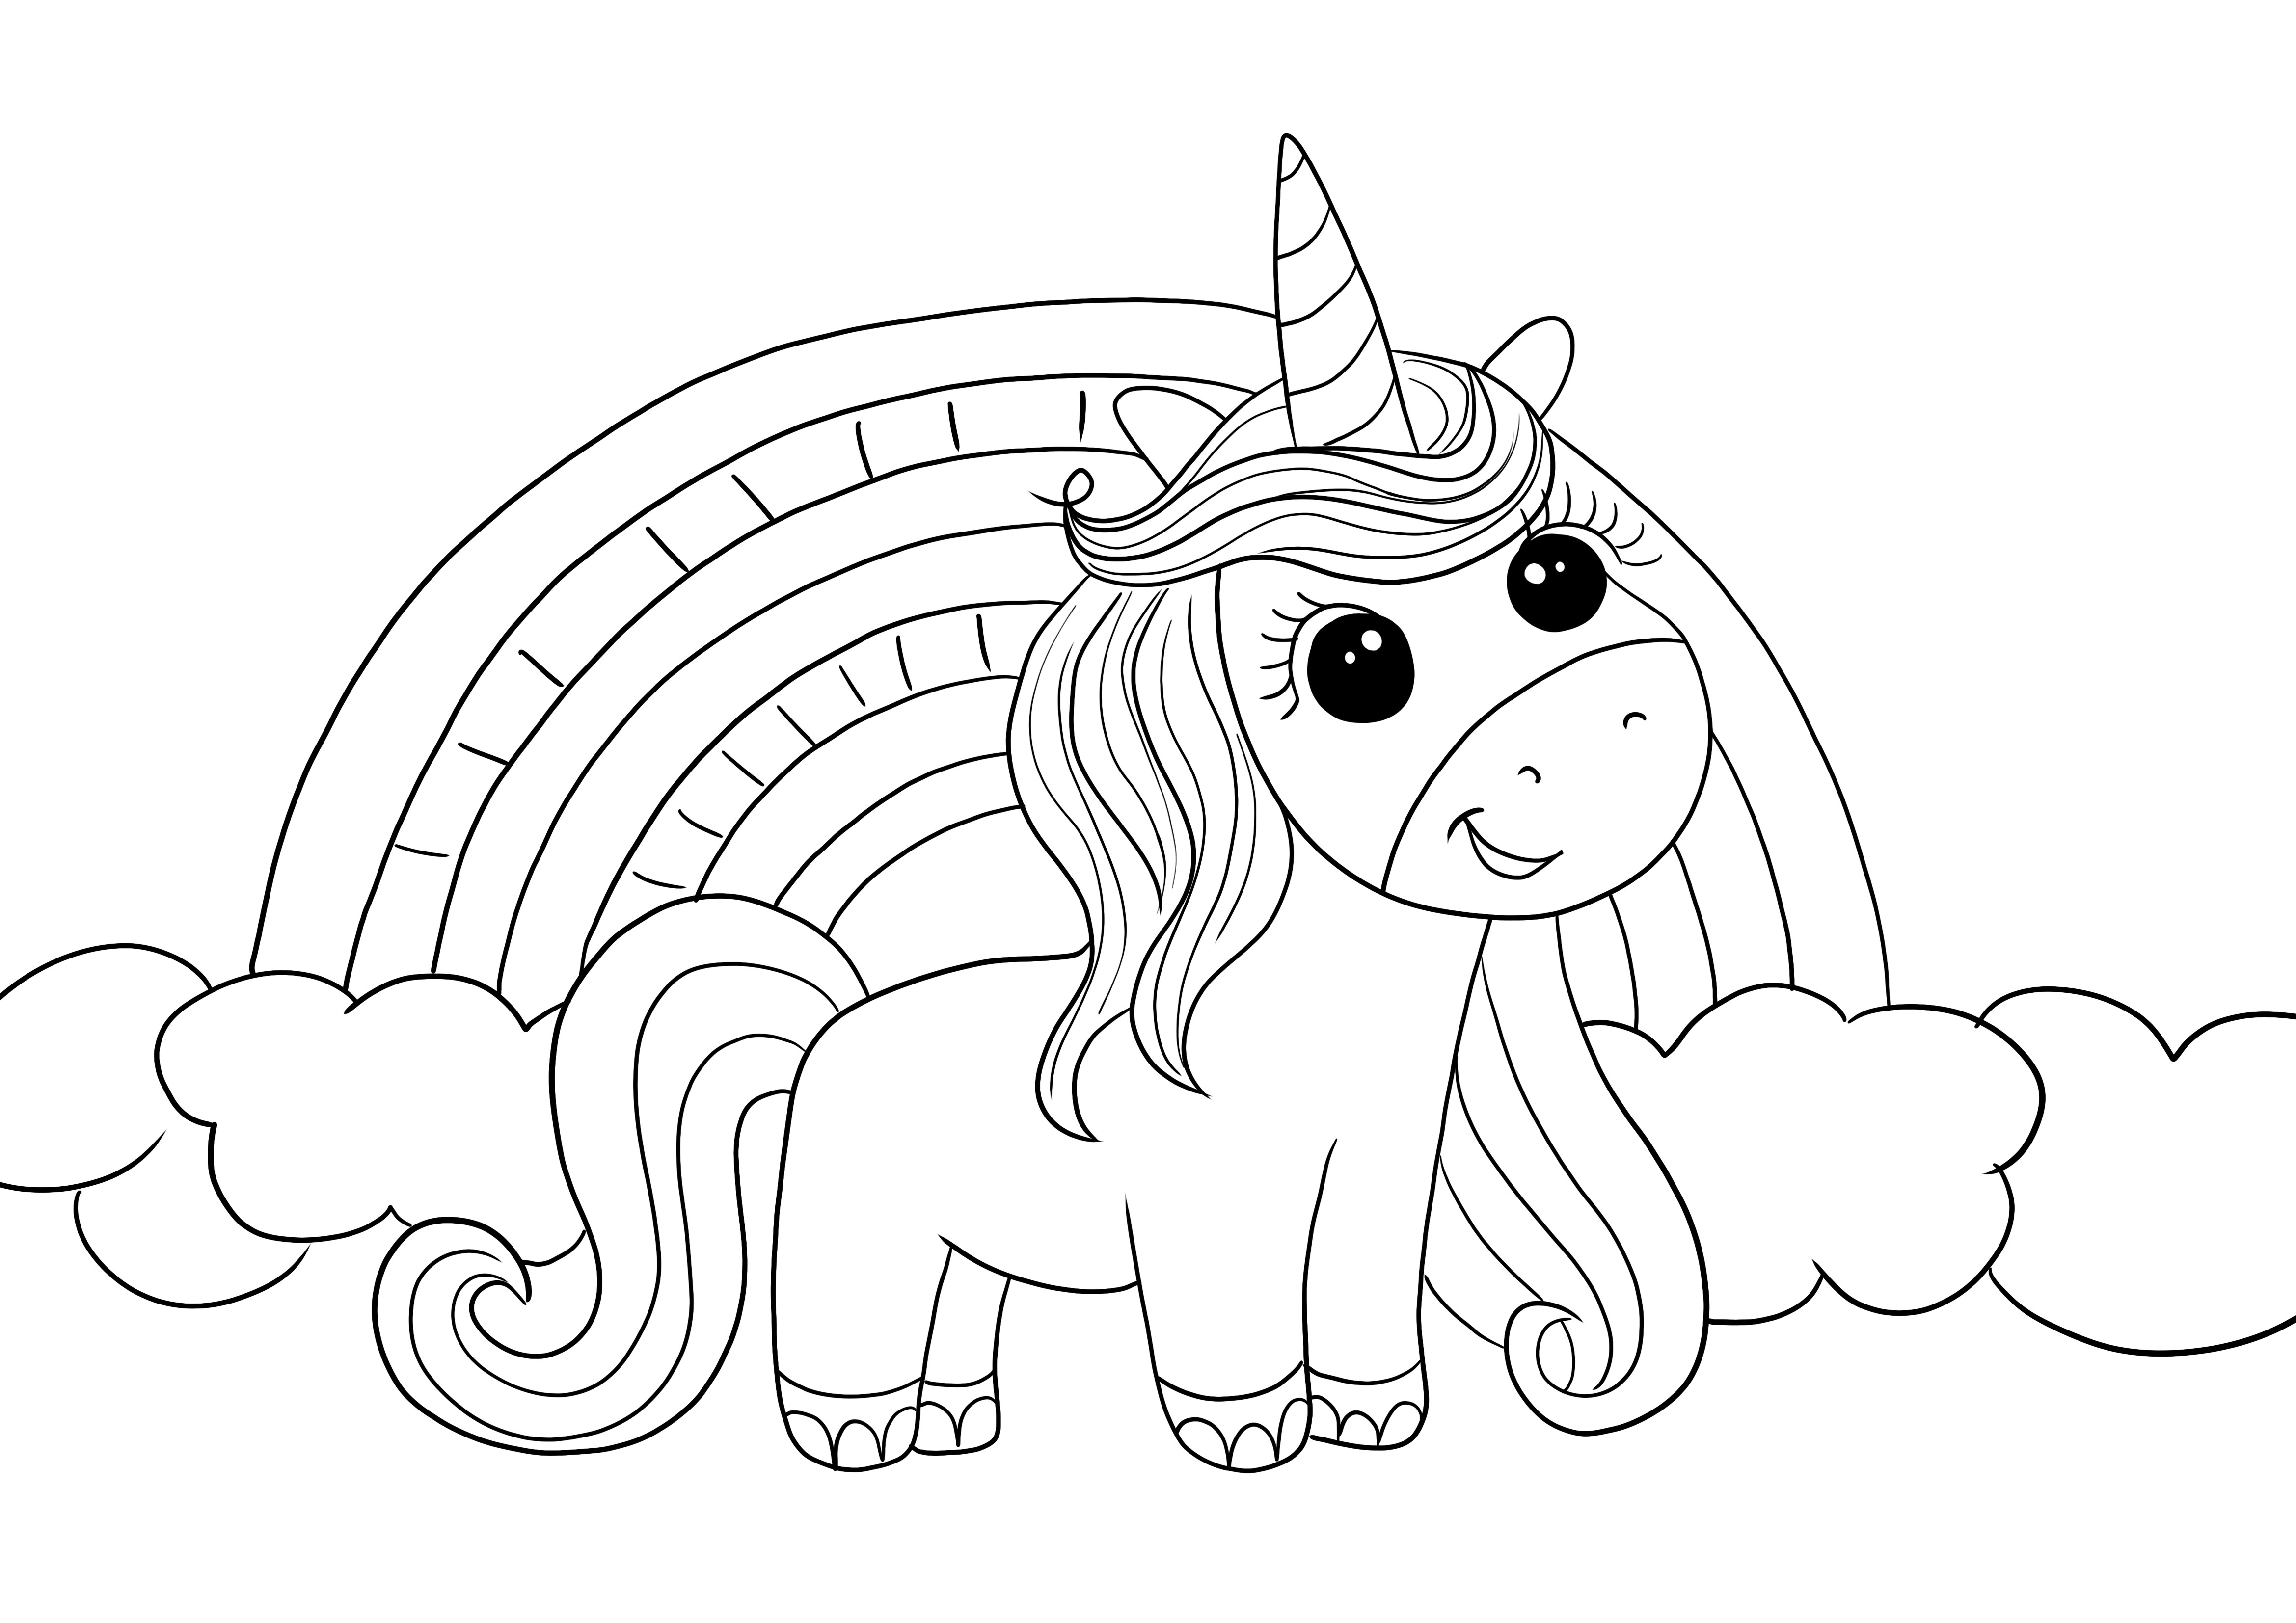 Unicorn and rainbow to print and color for free